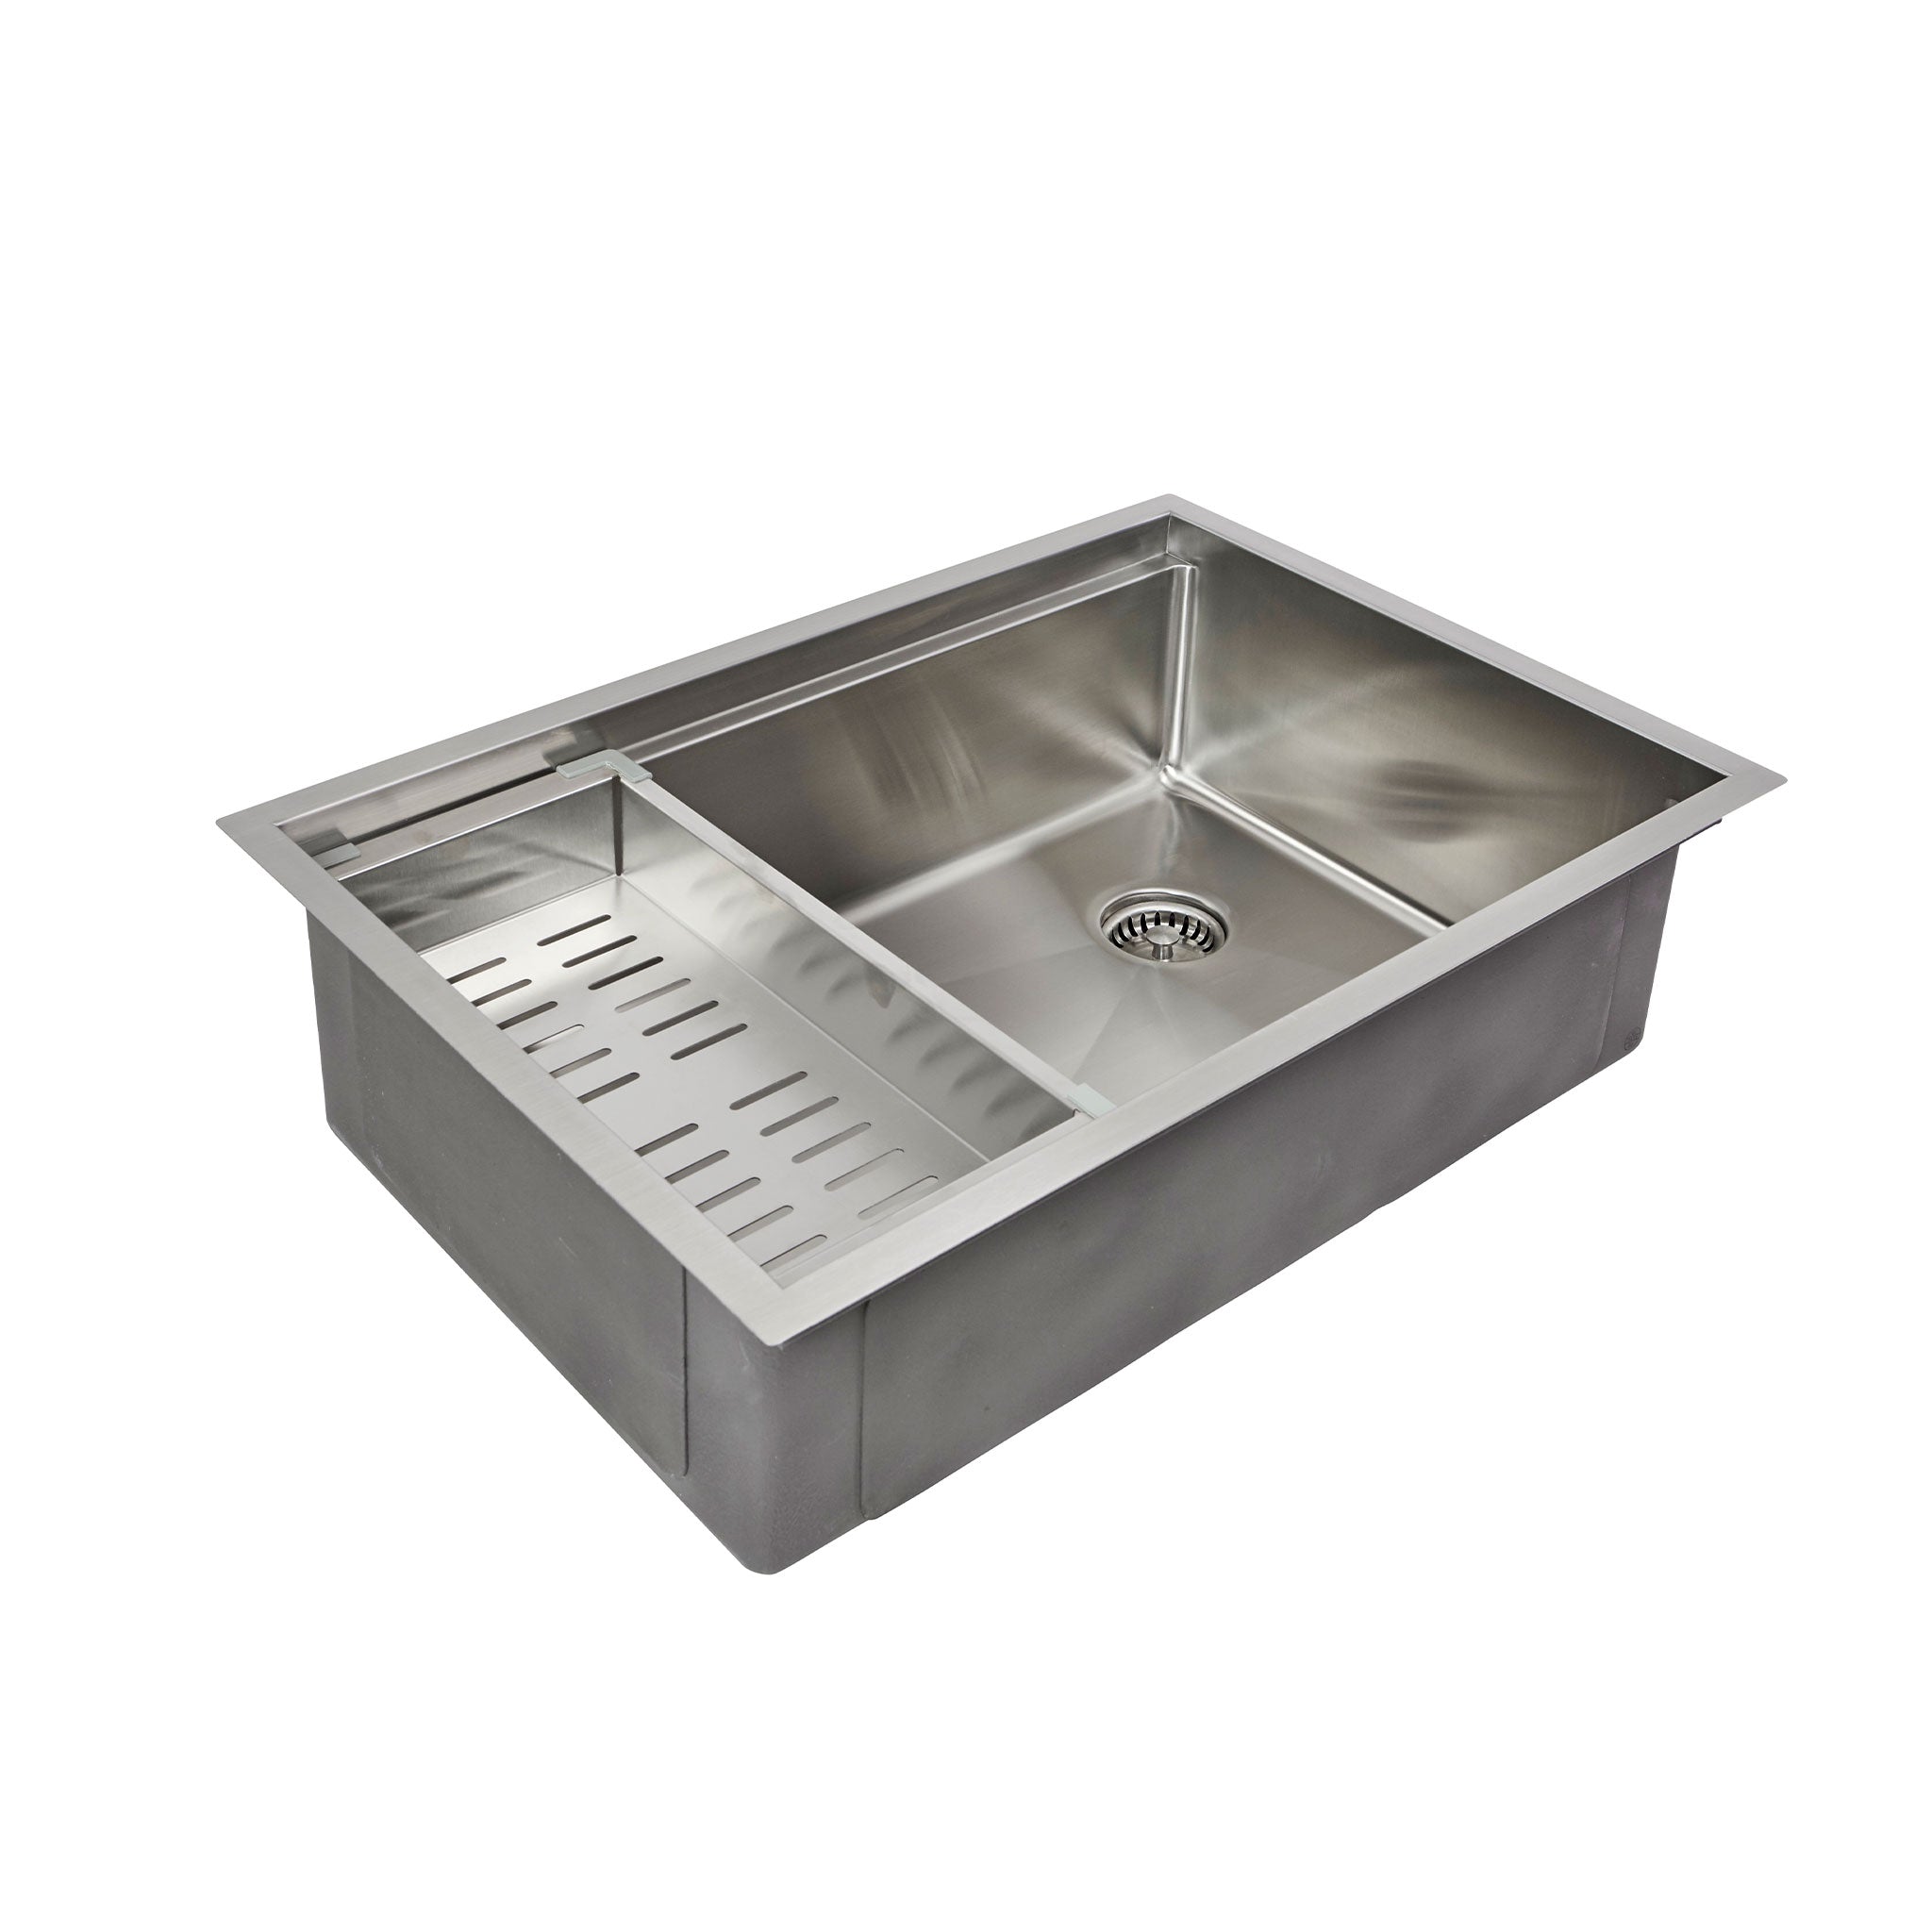 Create Good Sinks’ 28” workstation sink with the right, offset seamless drain and a stainless steel colander accessory.